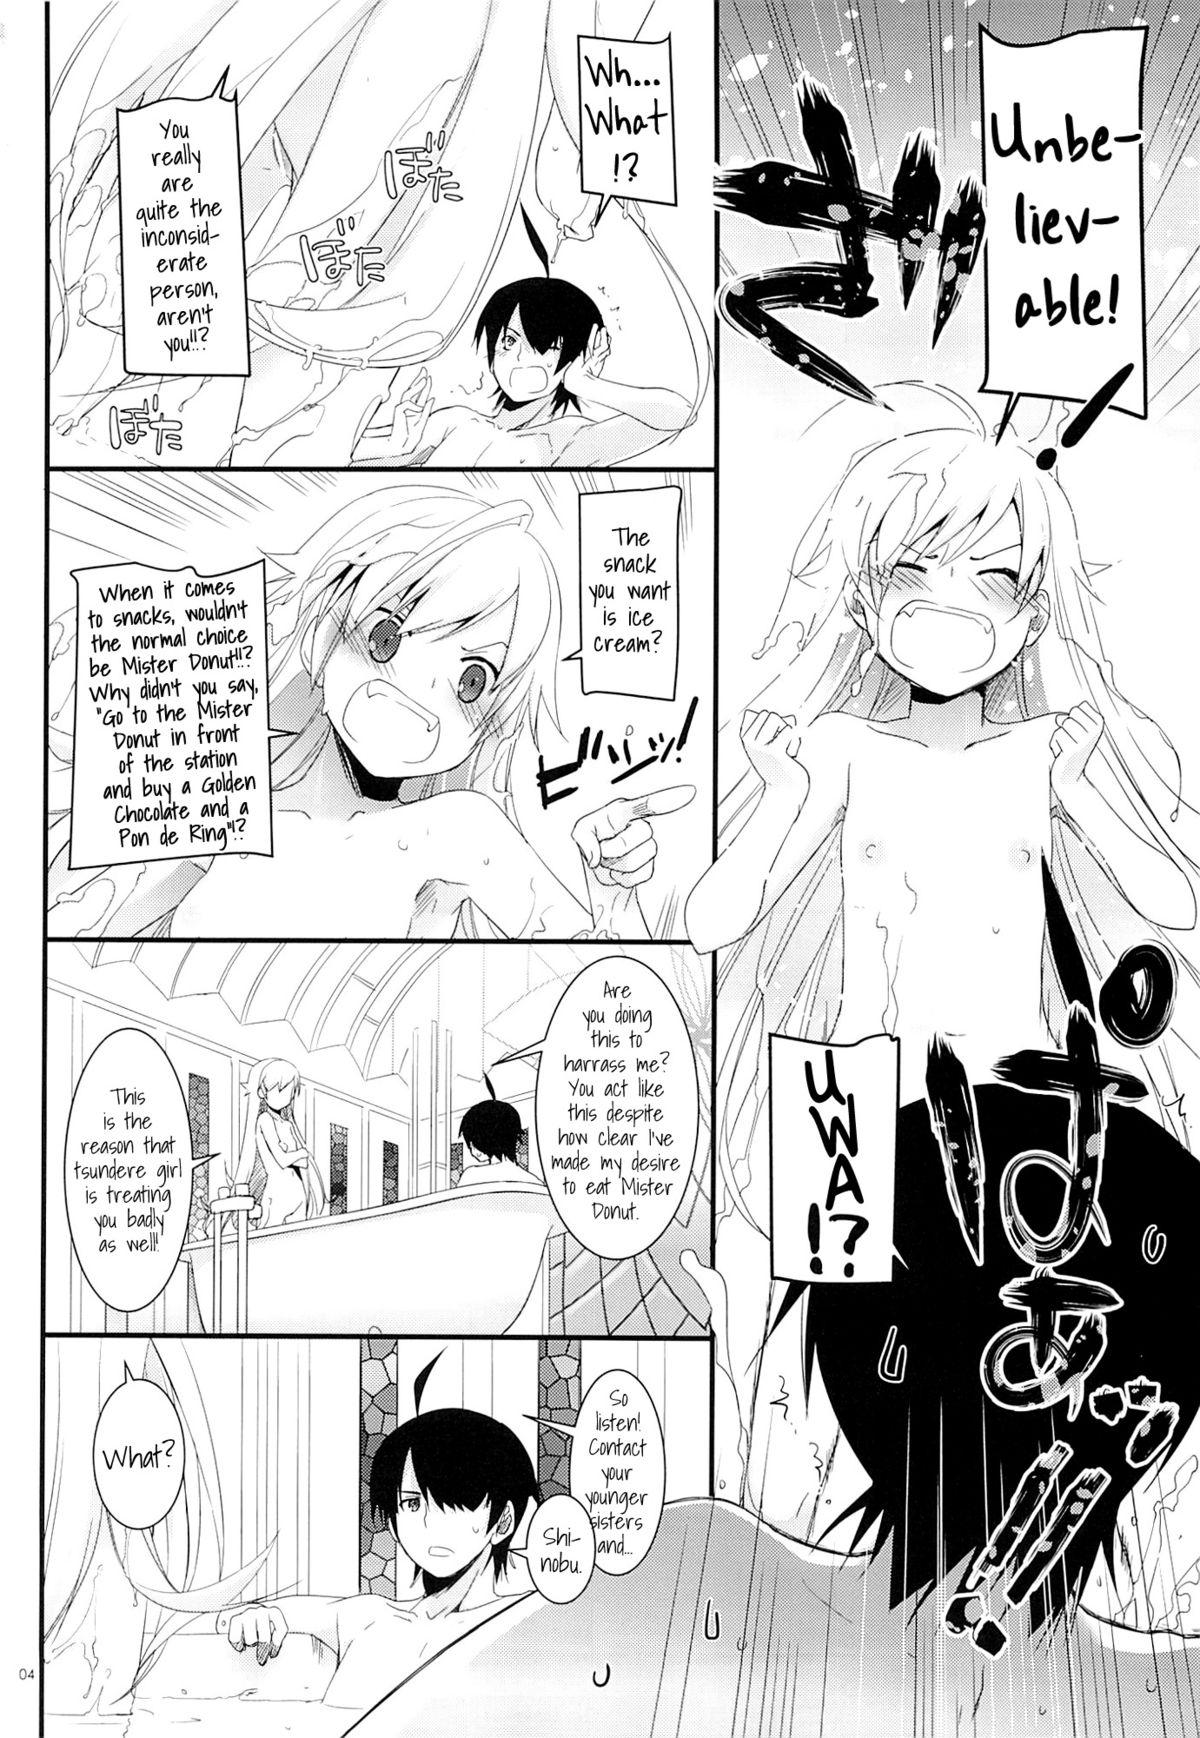 Free 18 Year Old Porn D.L. action 79 - Bakemonogatari First Time - Page 3